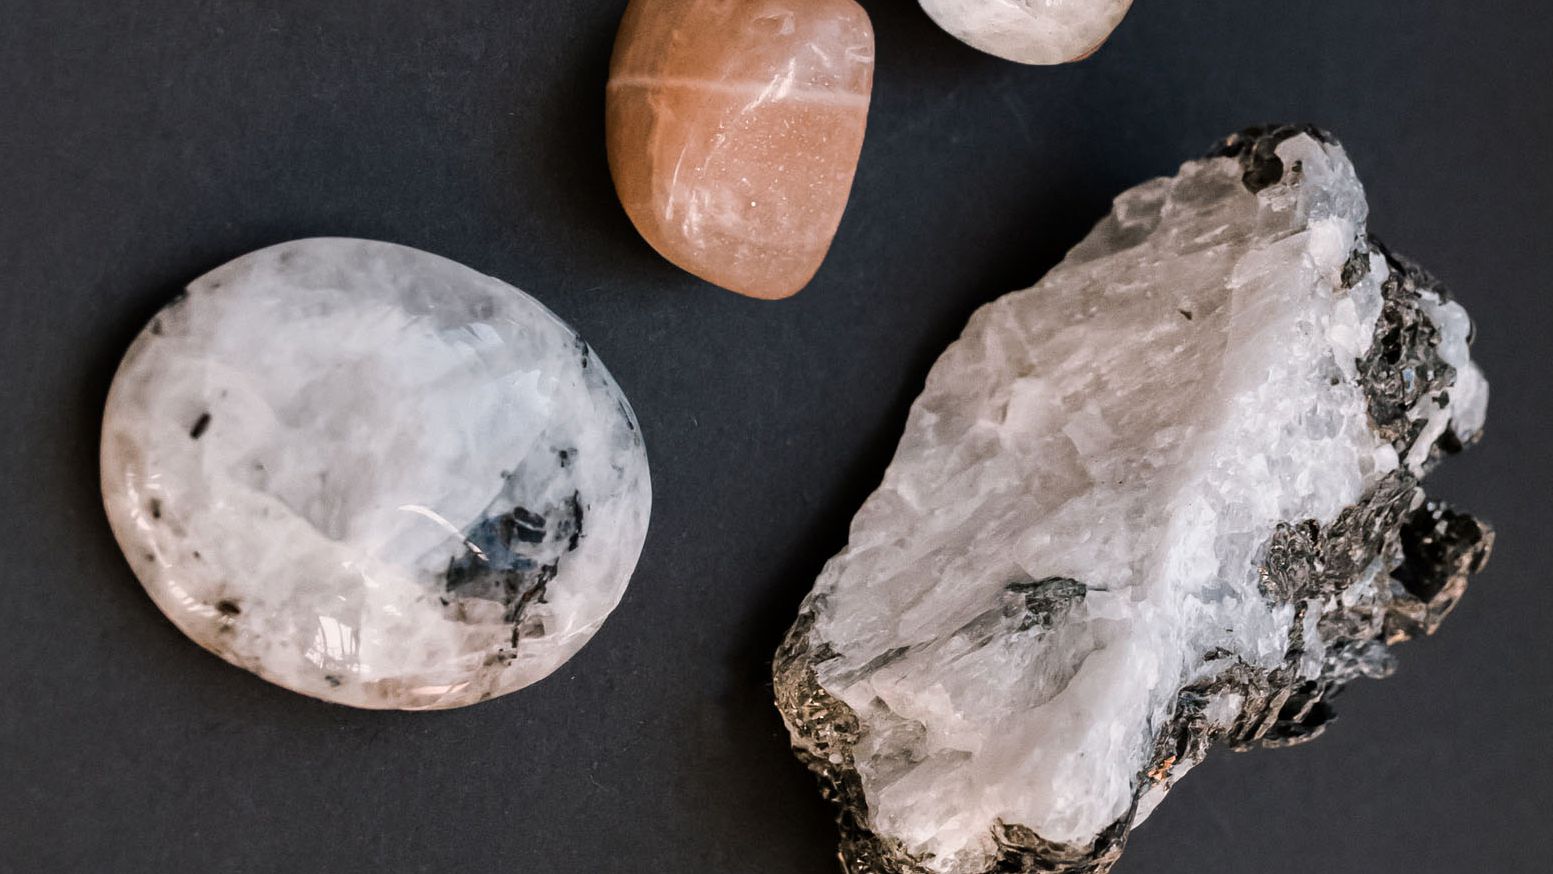 The Healing Crystals for Period Pain